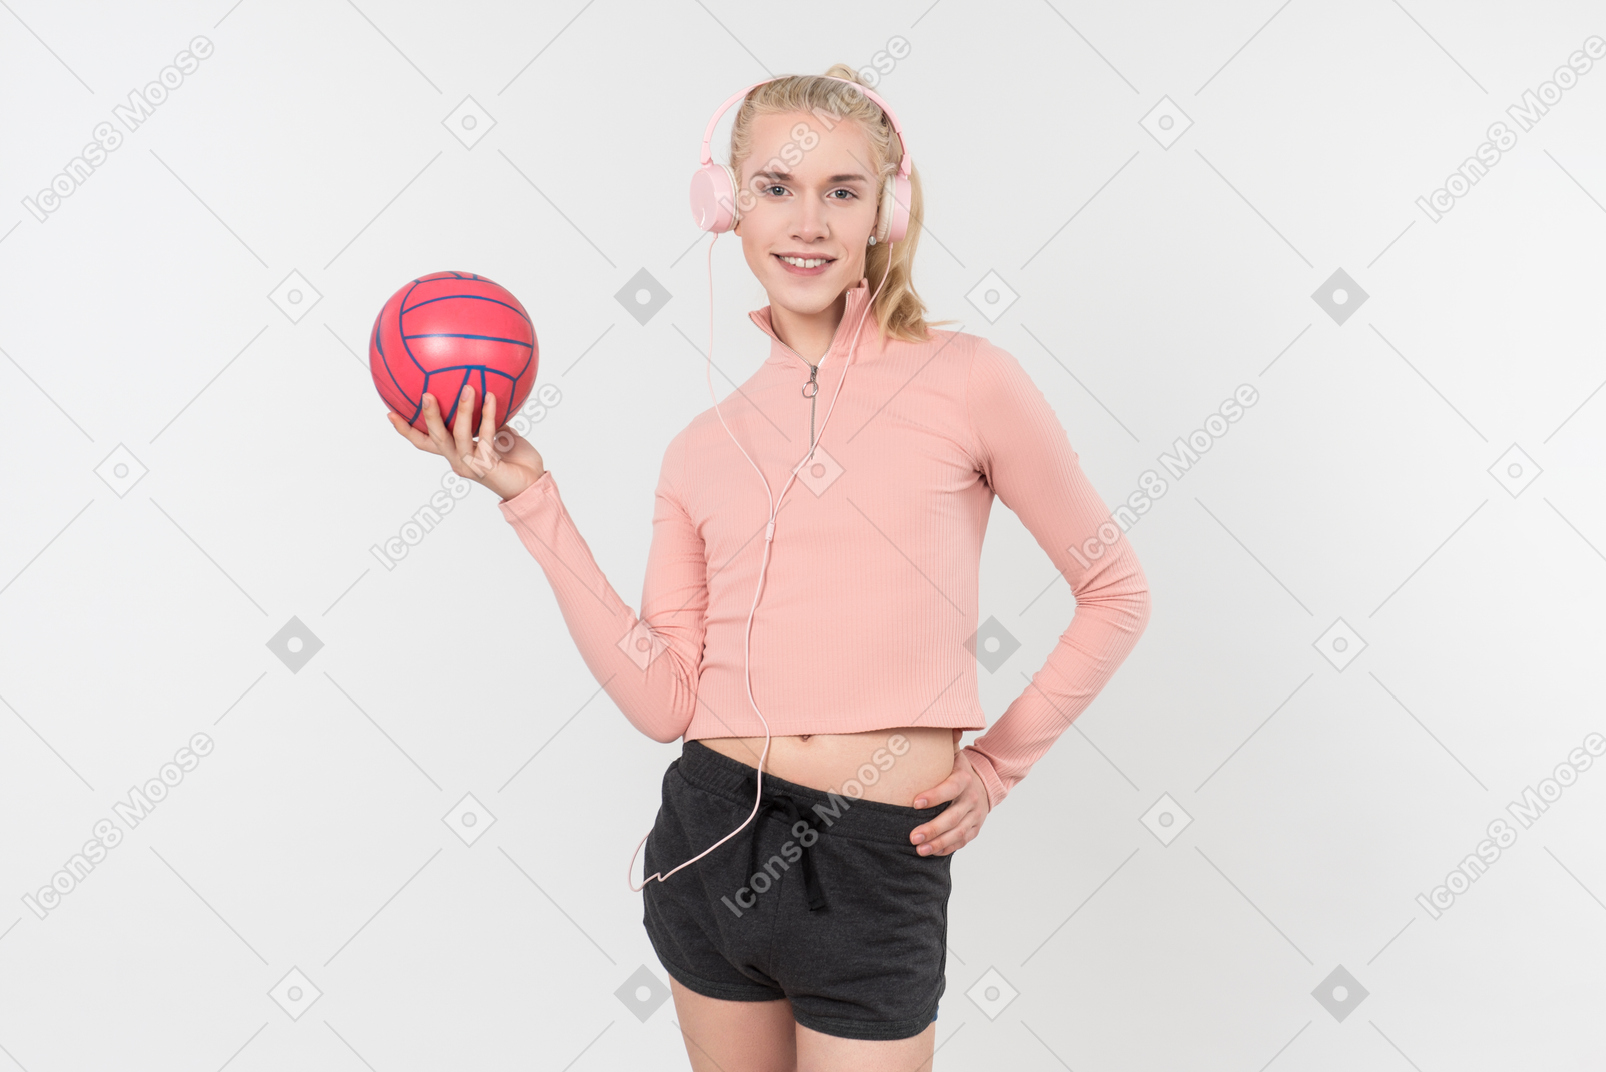 Young blond-haired person in black and pink outfit posing with sports  items against a light grey background